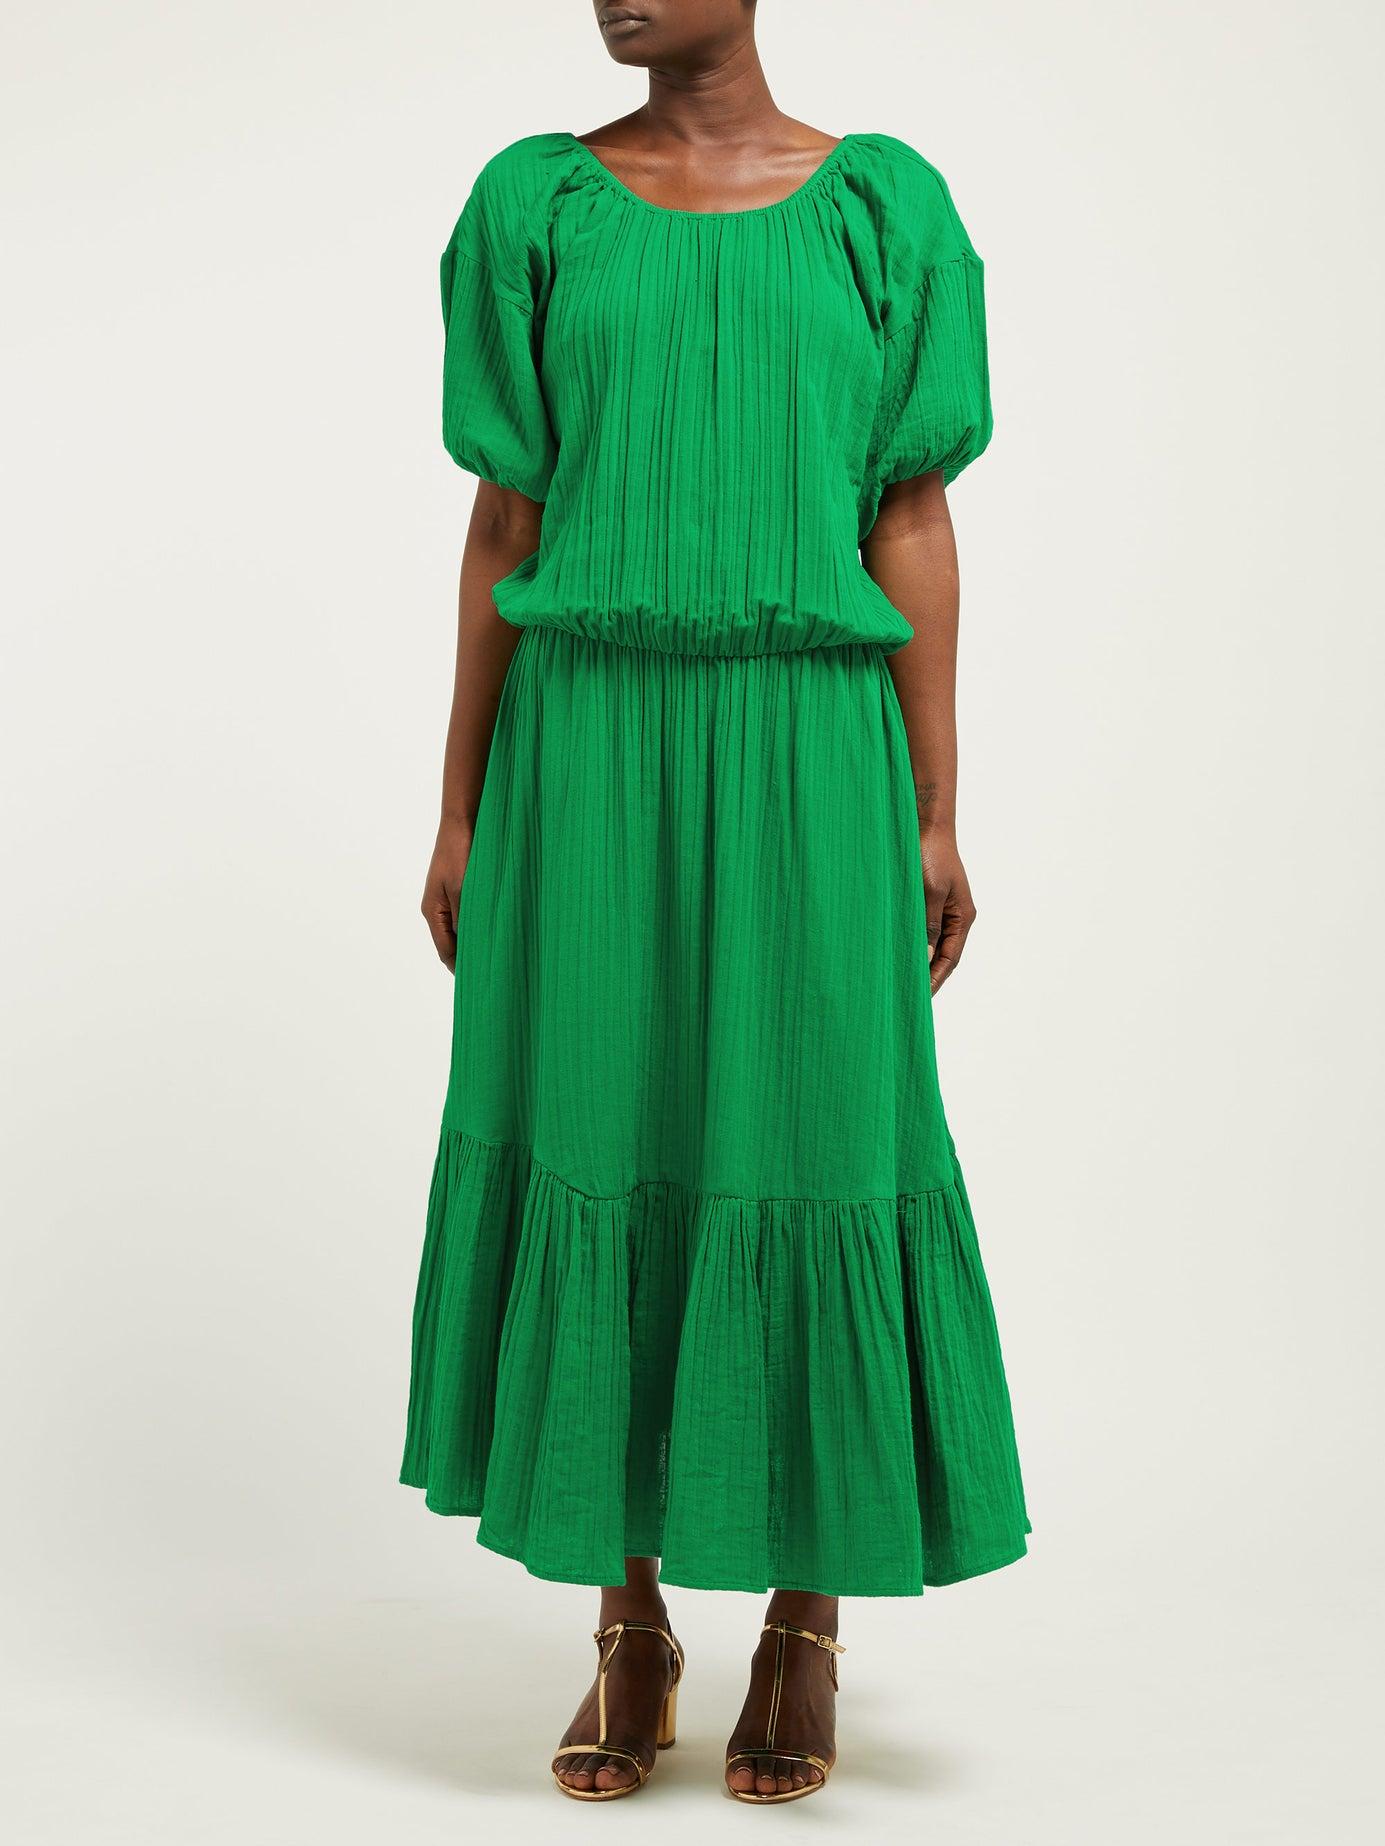 RHODE Frida Puffed-sleeve Tiered Cotton Dress in Green - Lyst